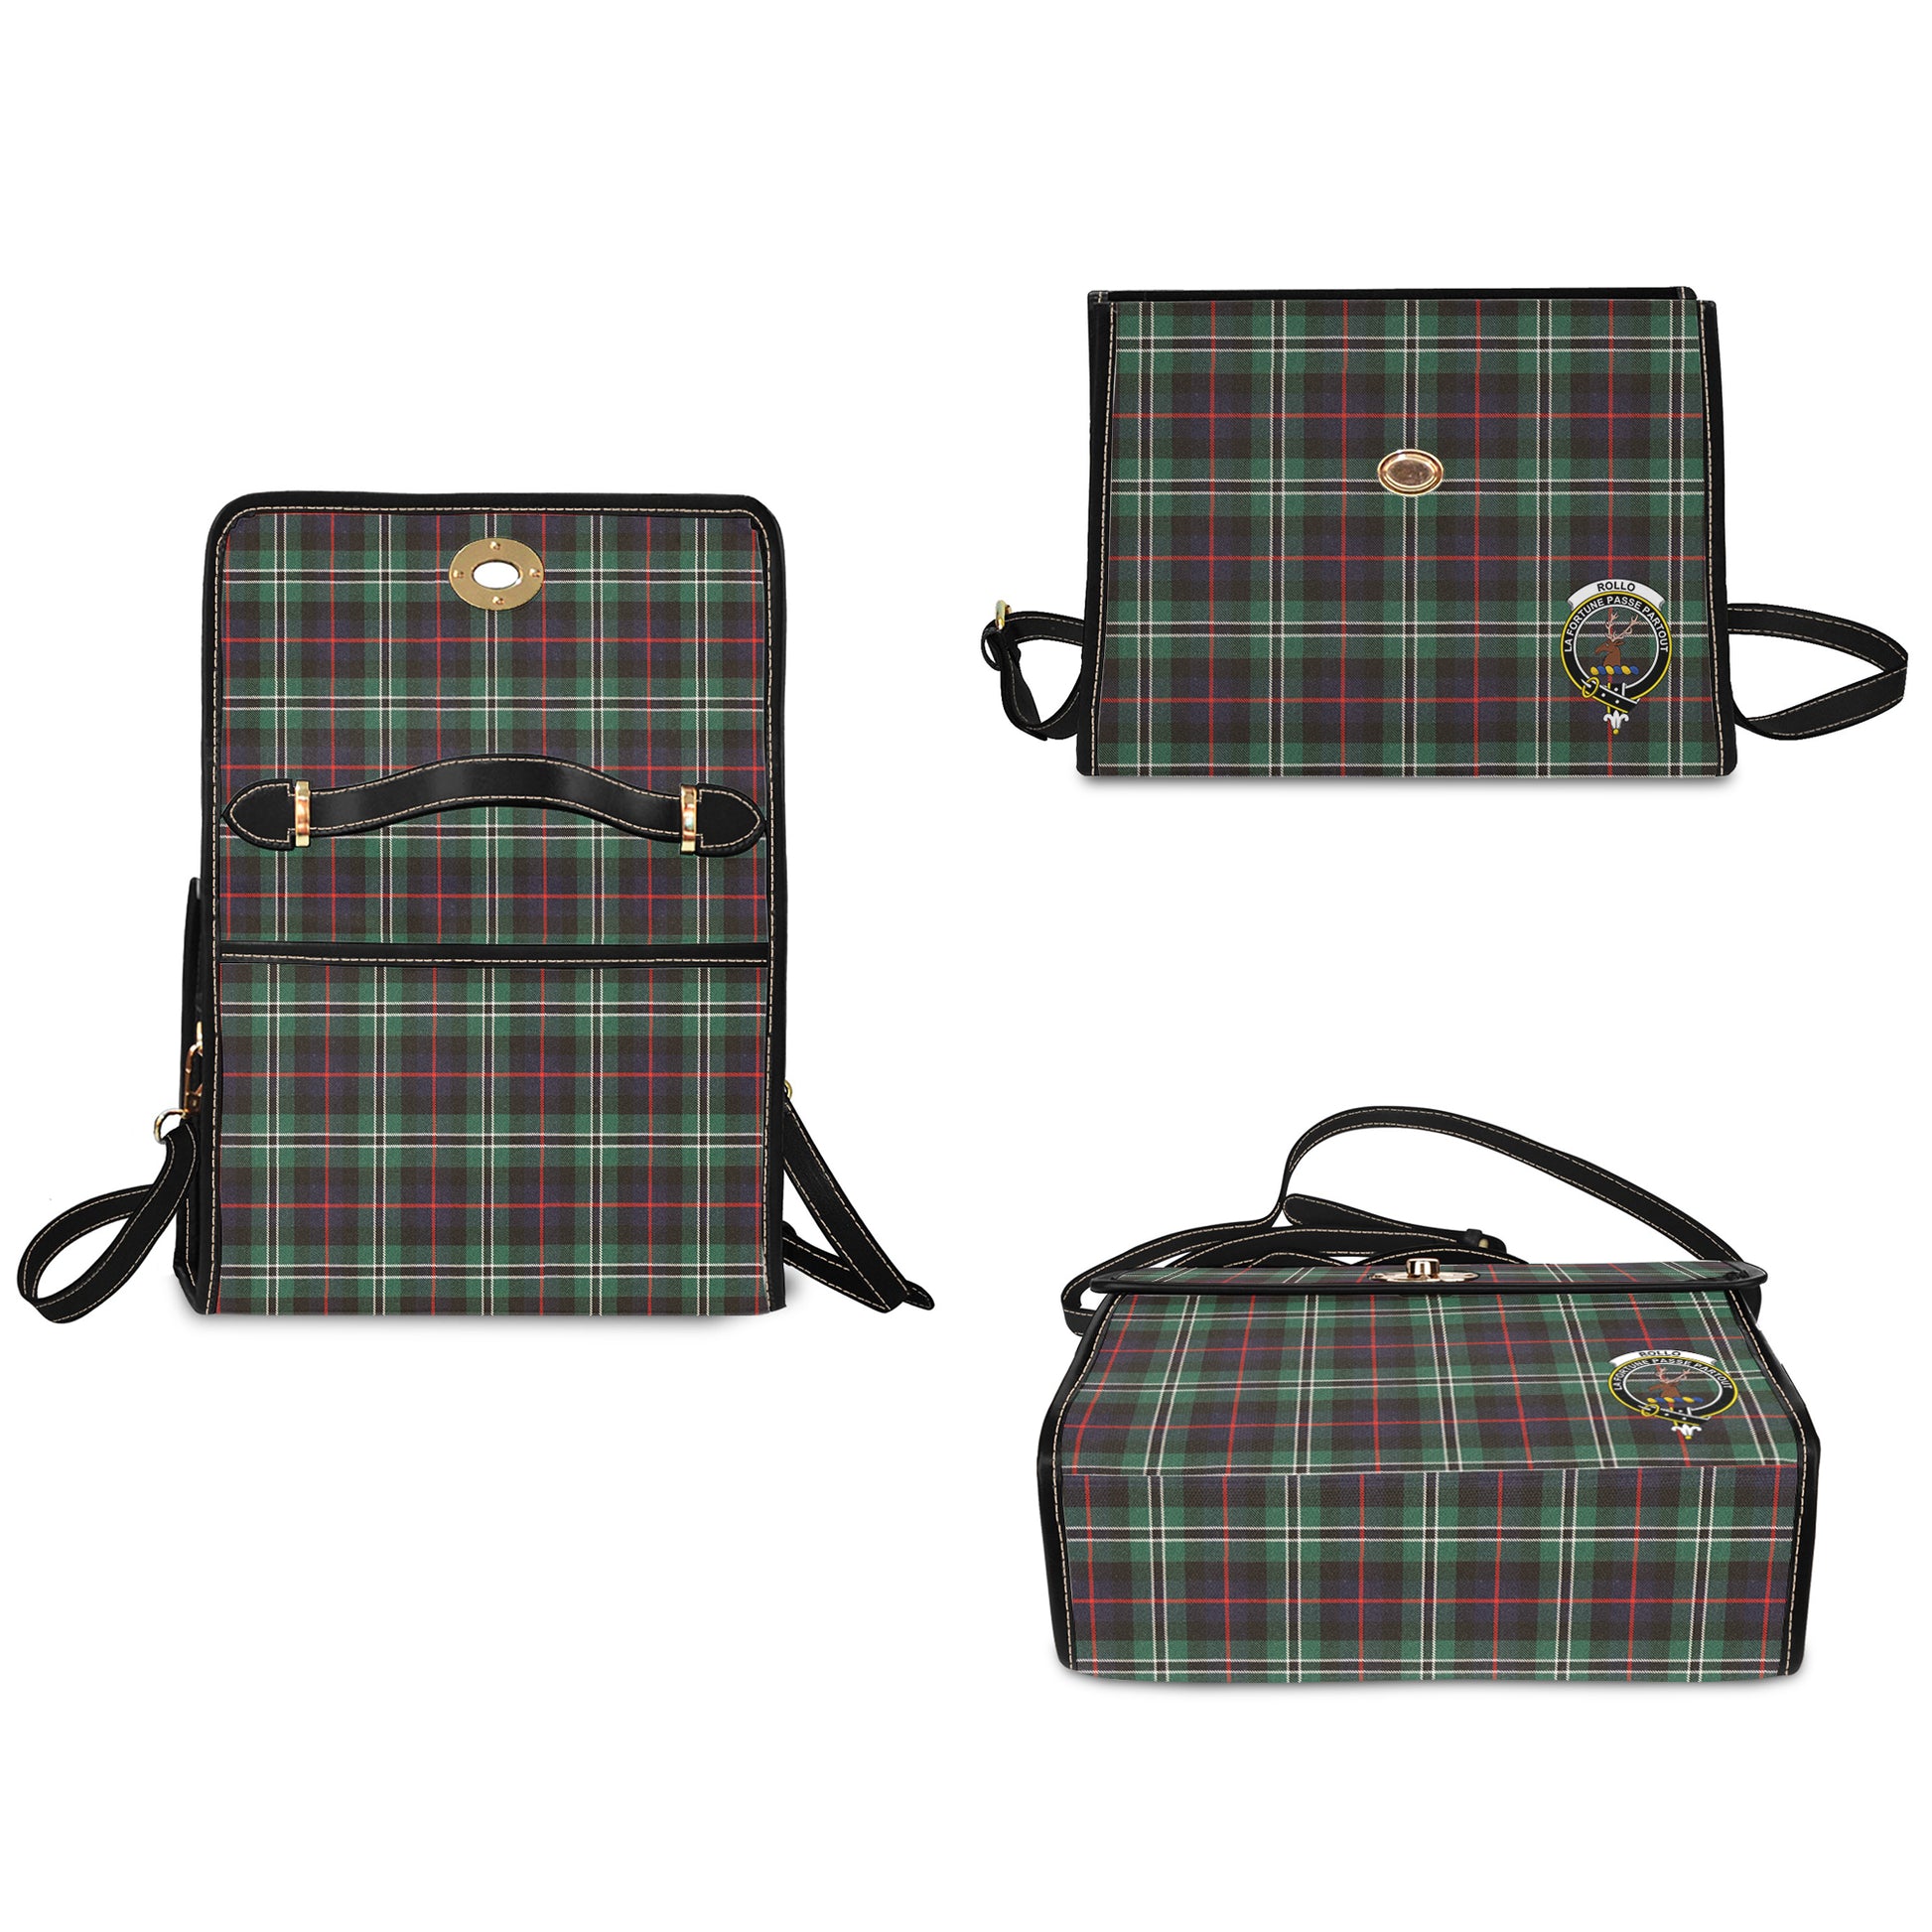 rollo-hunting-tartan-leather-strap-waterproof-canvas-bag-with-family-crest